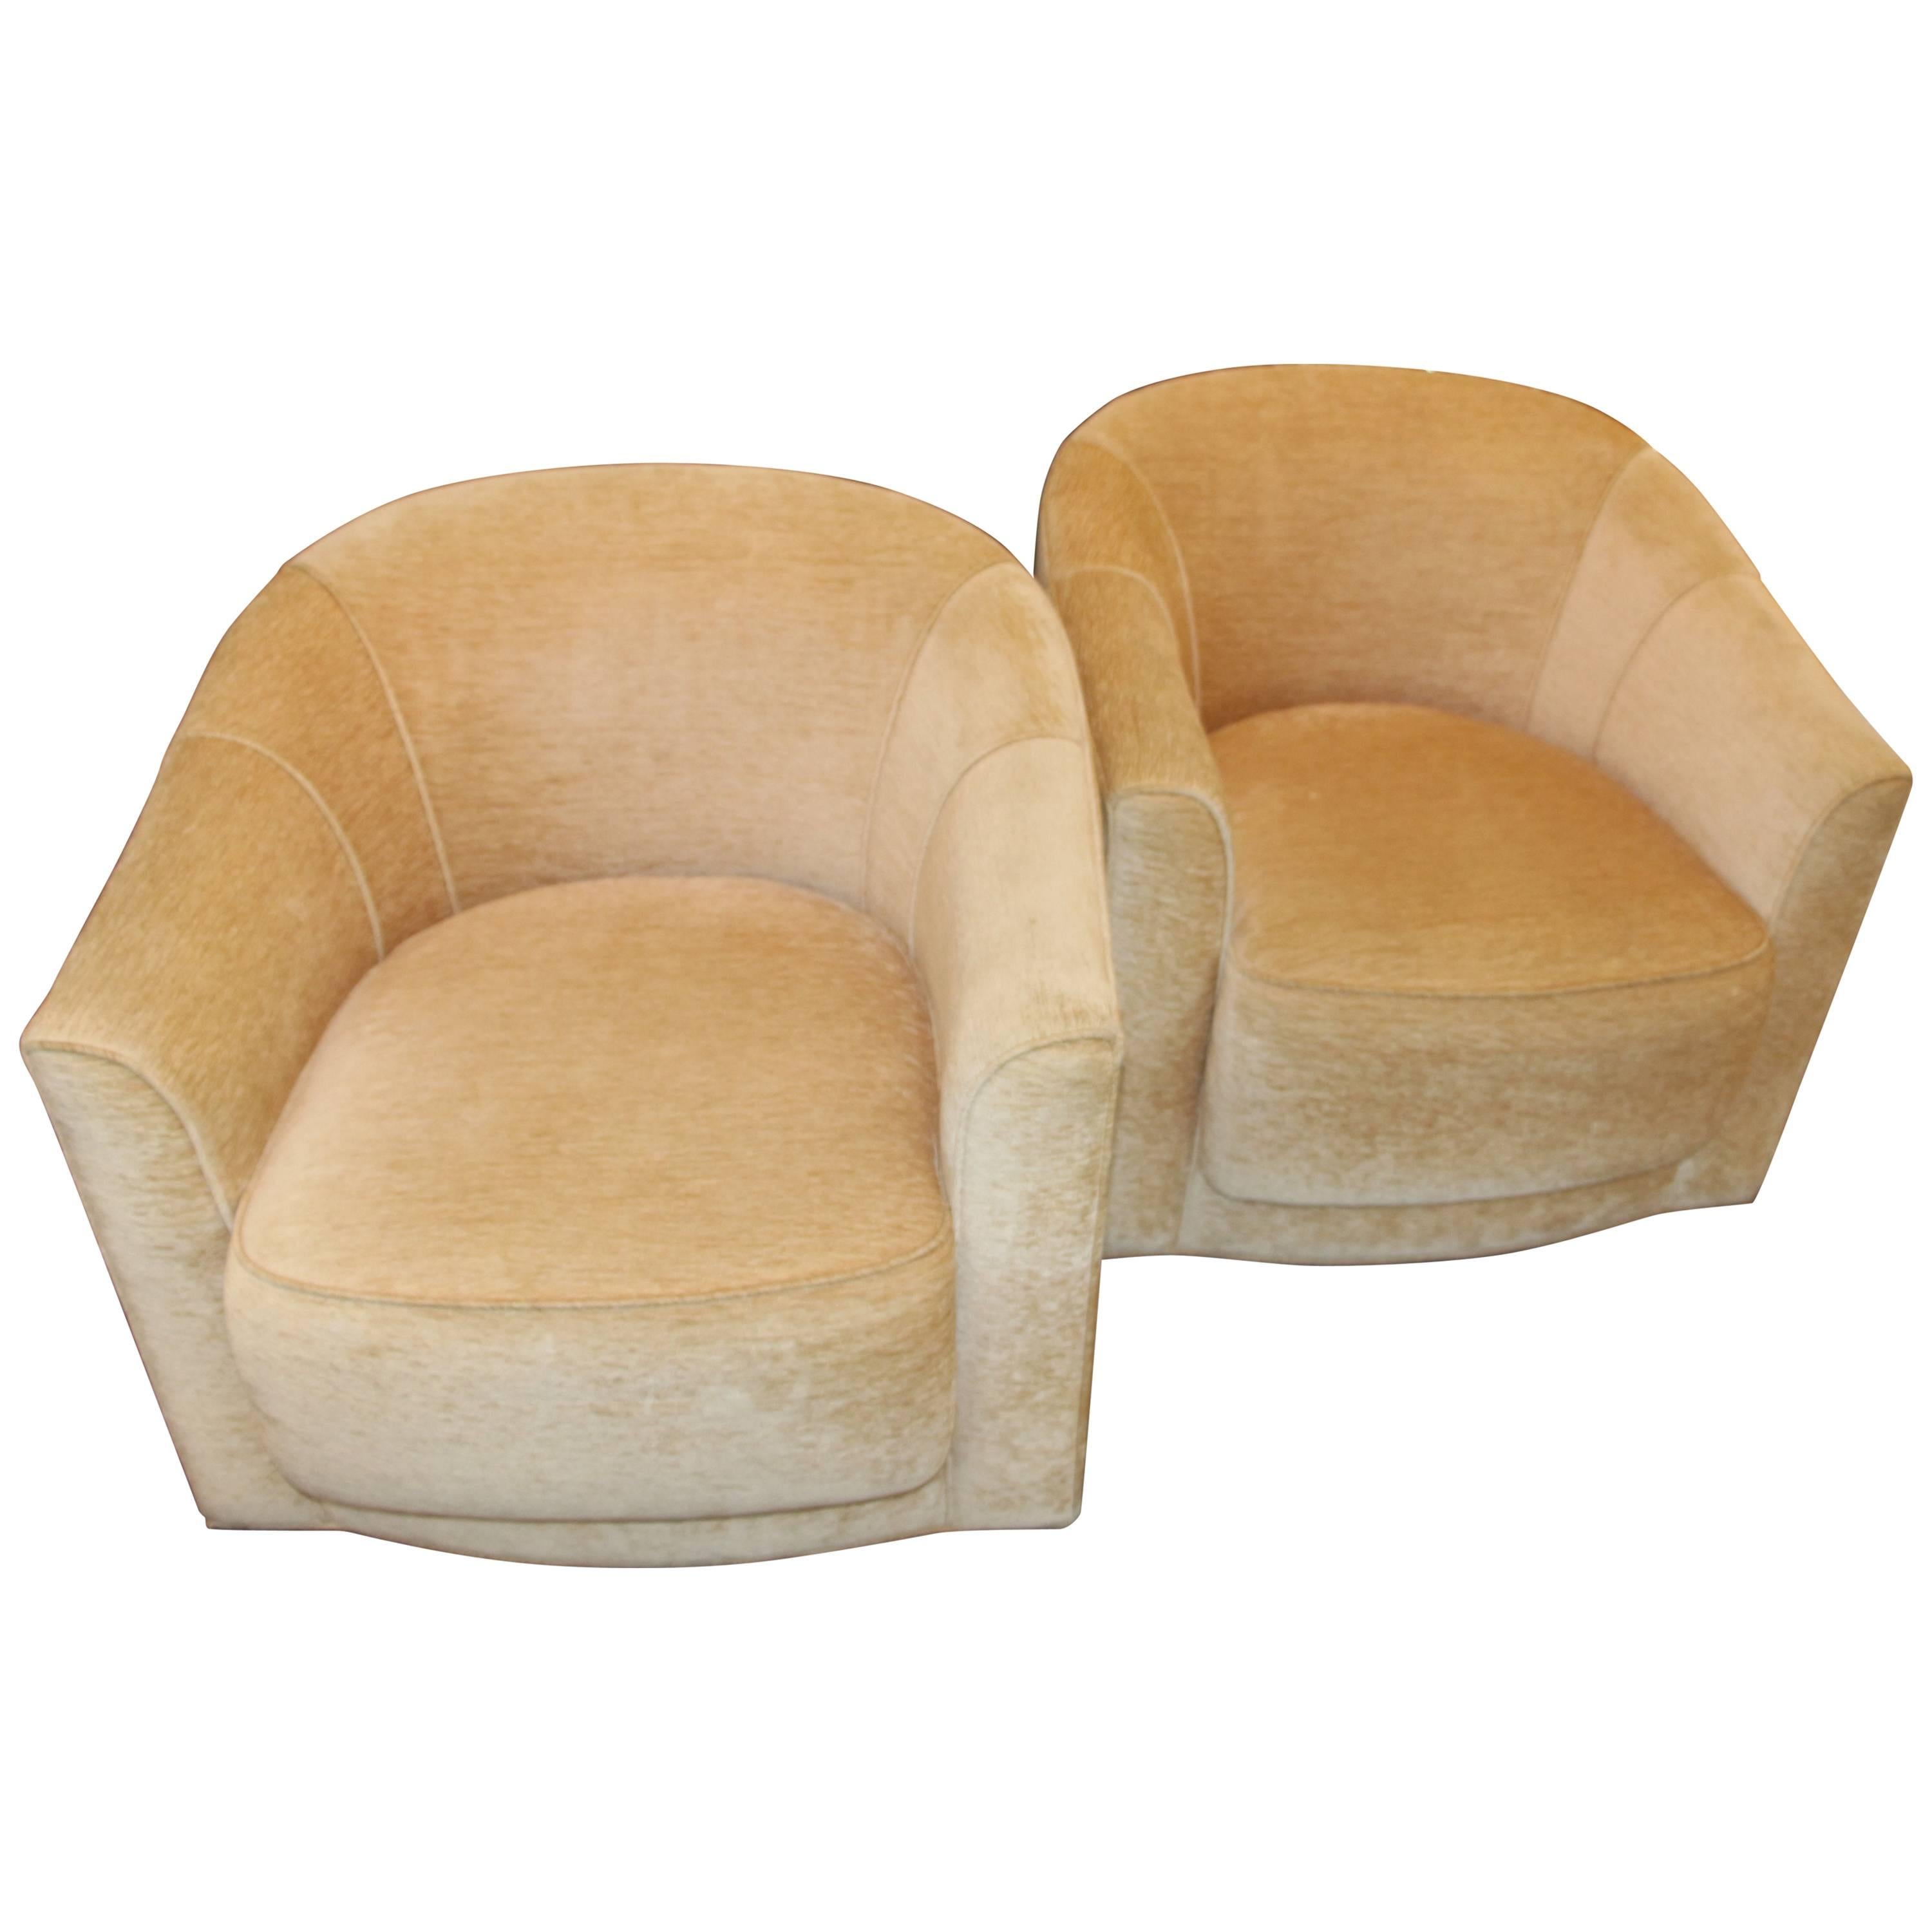 Pair of A. Rudin Chairs on Casters